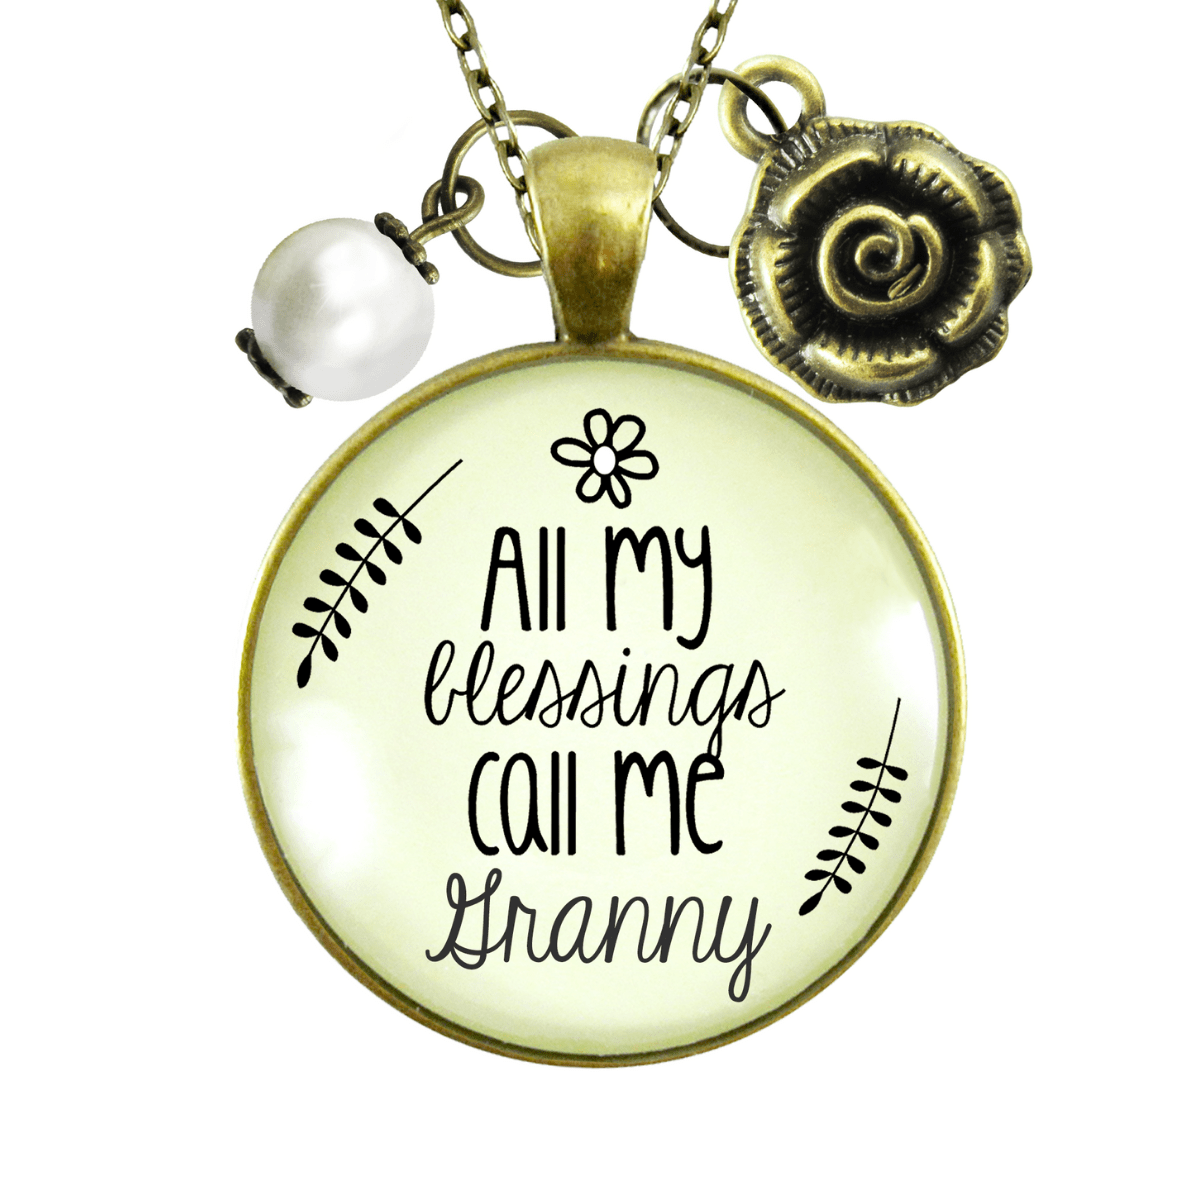 Gutsy Goodness Granny Necklace All My Blessings Grandma Rose Charm Gift Jewelry - Gutsy Goodness Handmade Jewelry;Granny Necklace All My Blessings Grandma Rose Charm Gift Jewelry - Gutsy Goodness Handmade Jewelry Gifts